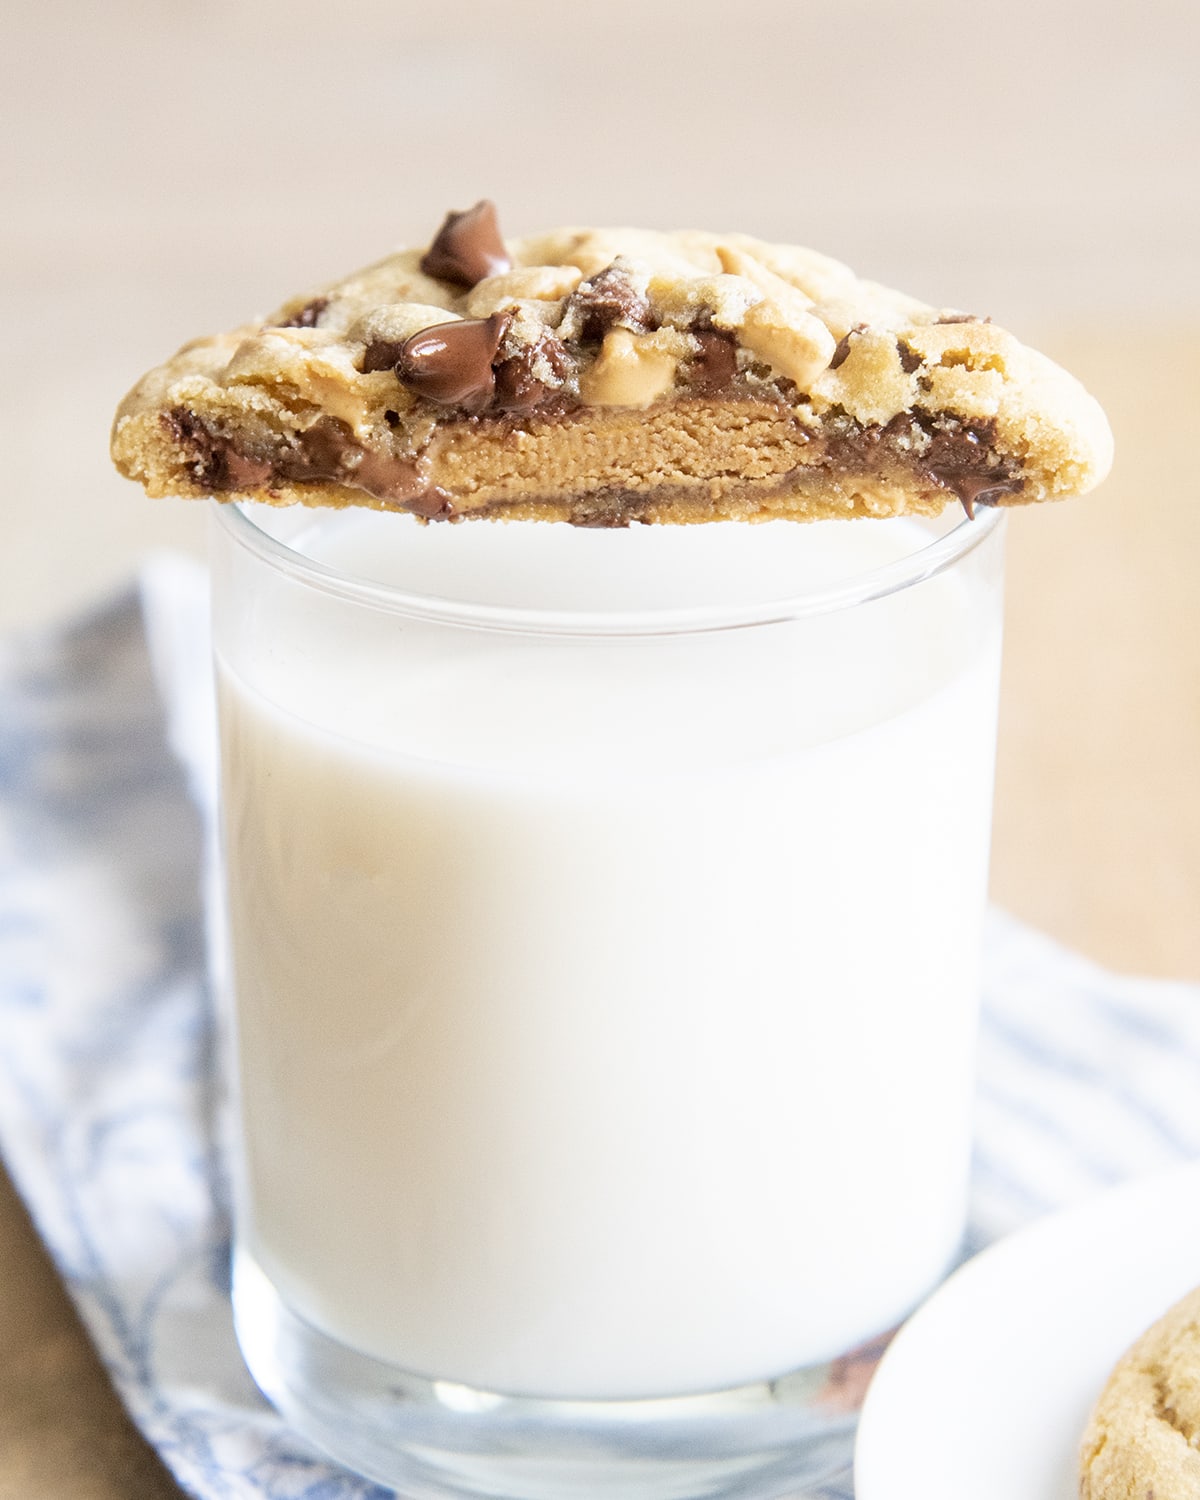 Half a cookie set on a cup of glass, showing the inside of the cookie with a peanut butter cup, and melted chocolate chips.